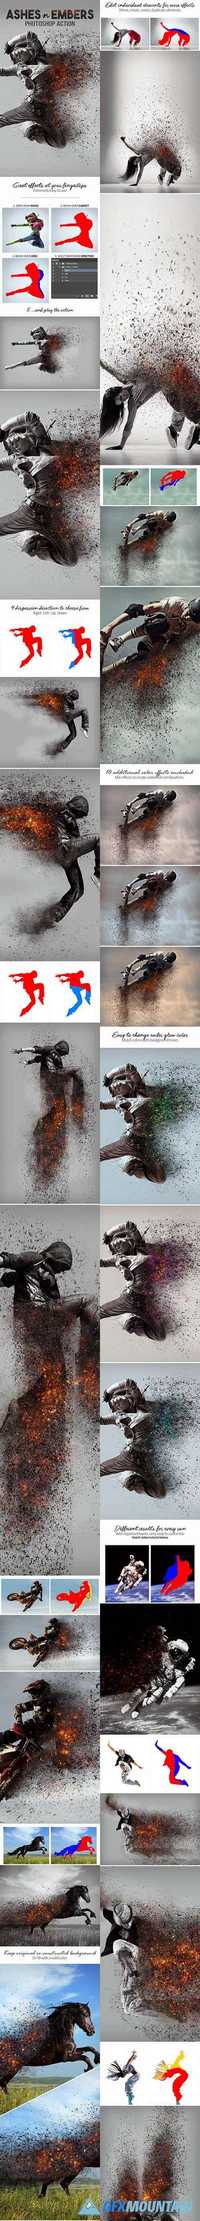 GraphicRiver - Ashes n Embers Photoshop Action - 18525809